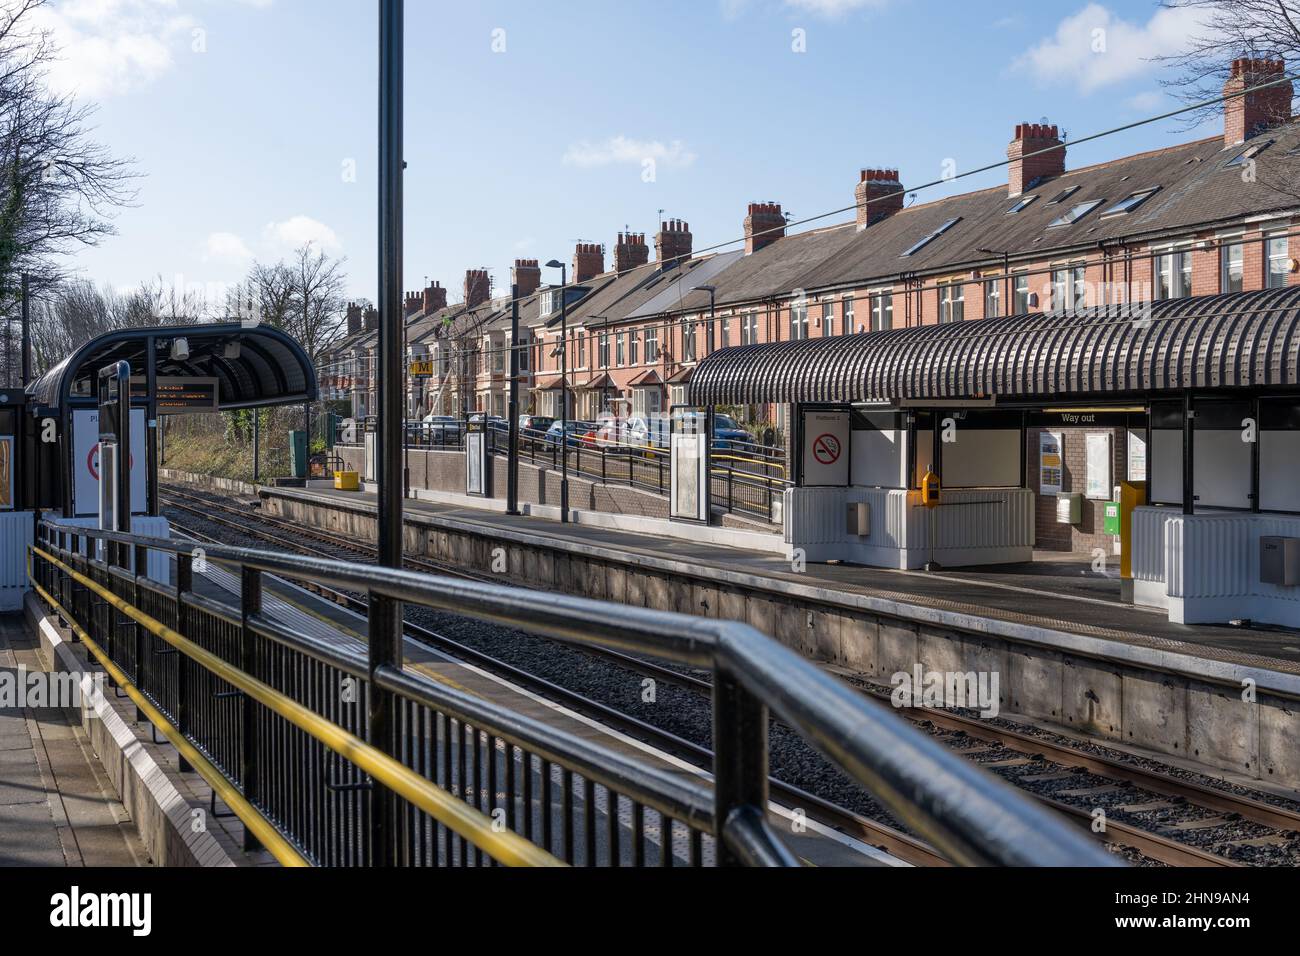 Ilford Road station, on the Tyne and Wear Metro electric light rail train system, Newcastle upon Tyne, UK. Stock Photo